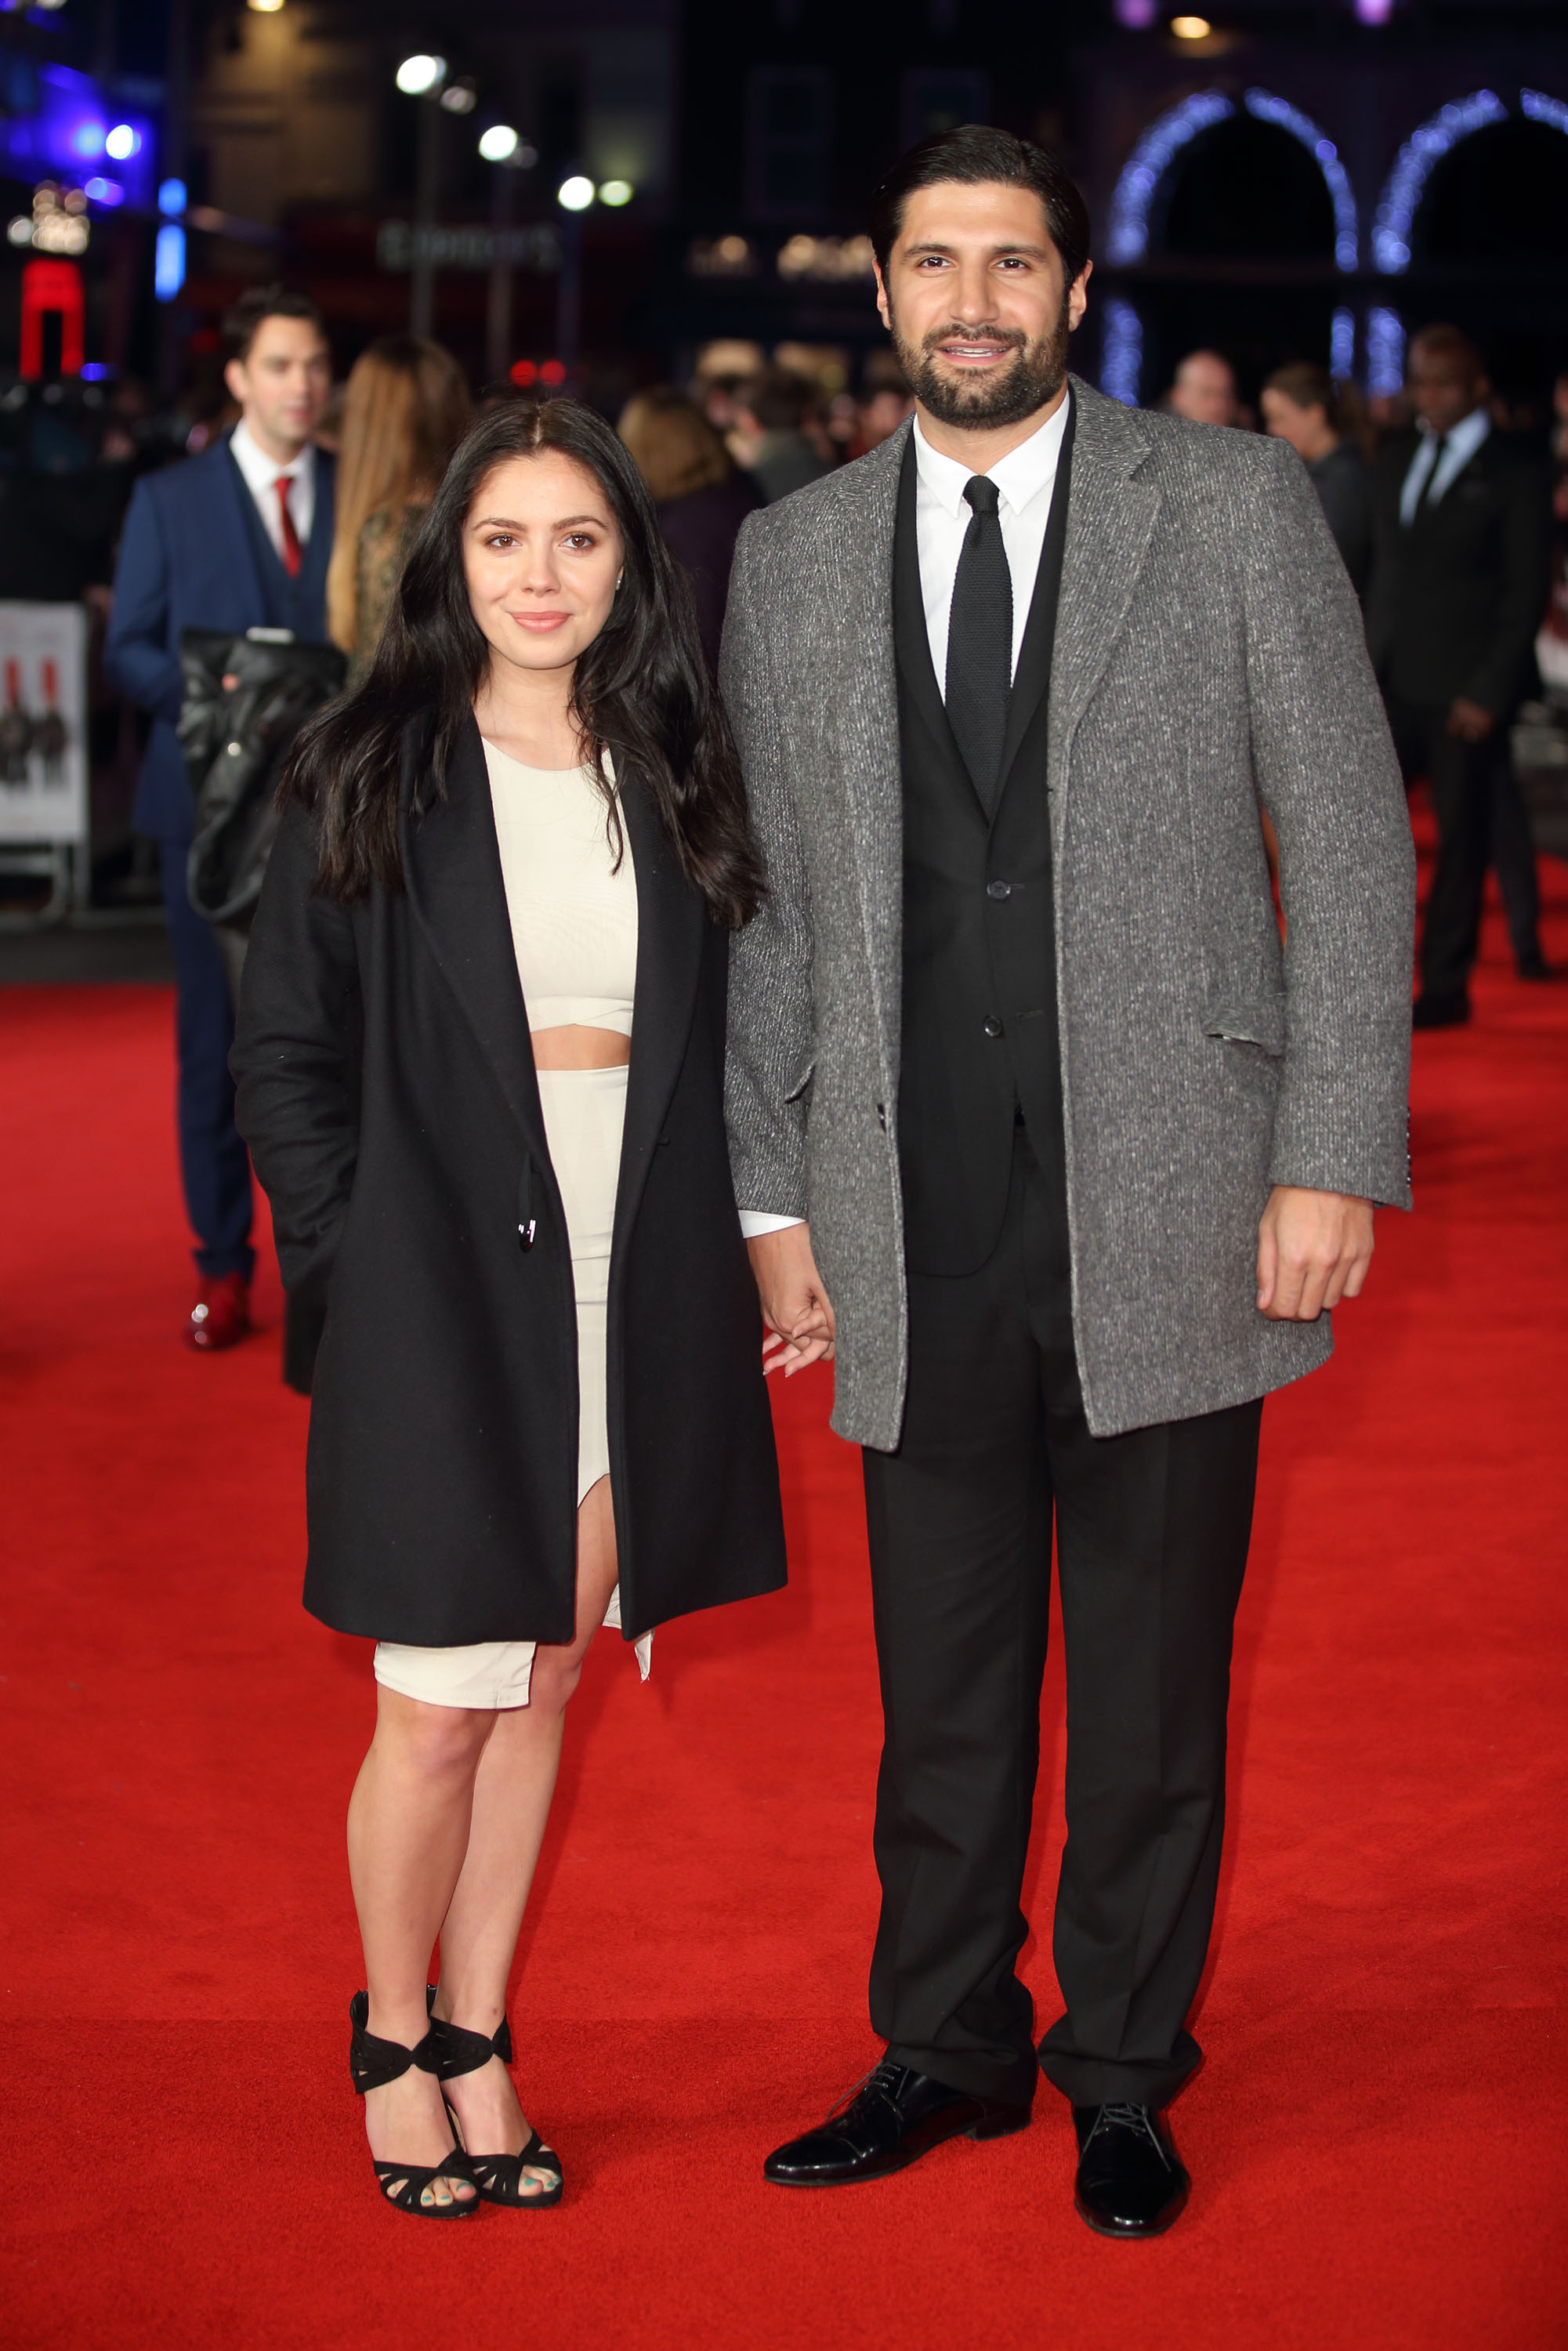 Talitha Stone and Kayvan Novak attend the European Premiere of "The Hateful Eight" at Odeon Leicester Square on December 10, 2015, in London, England. | Source: Getty Images